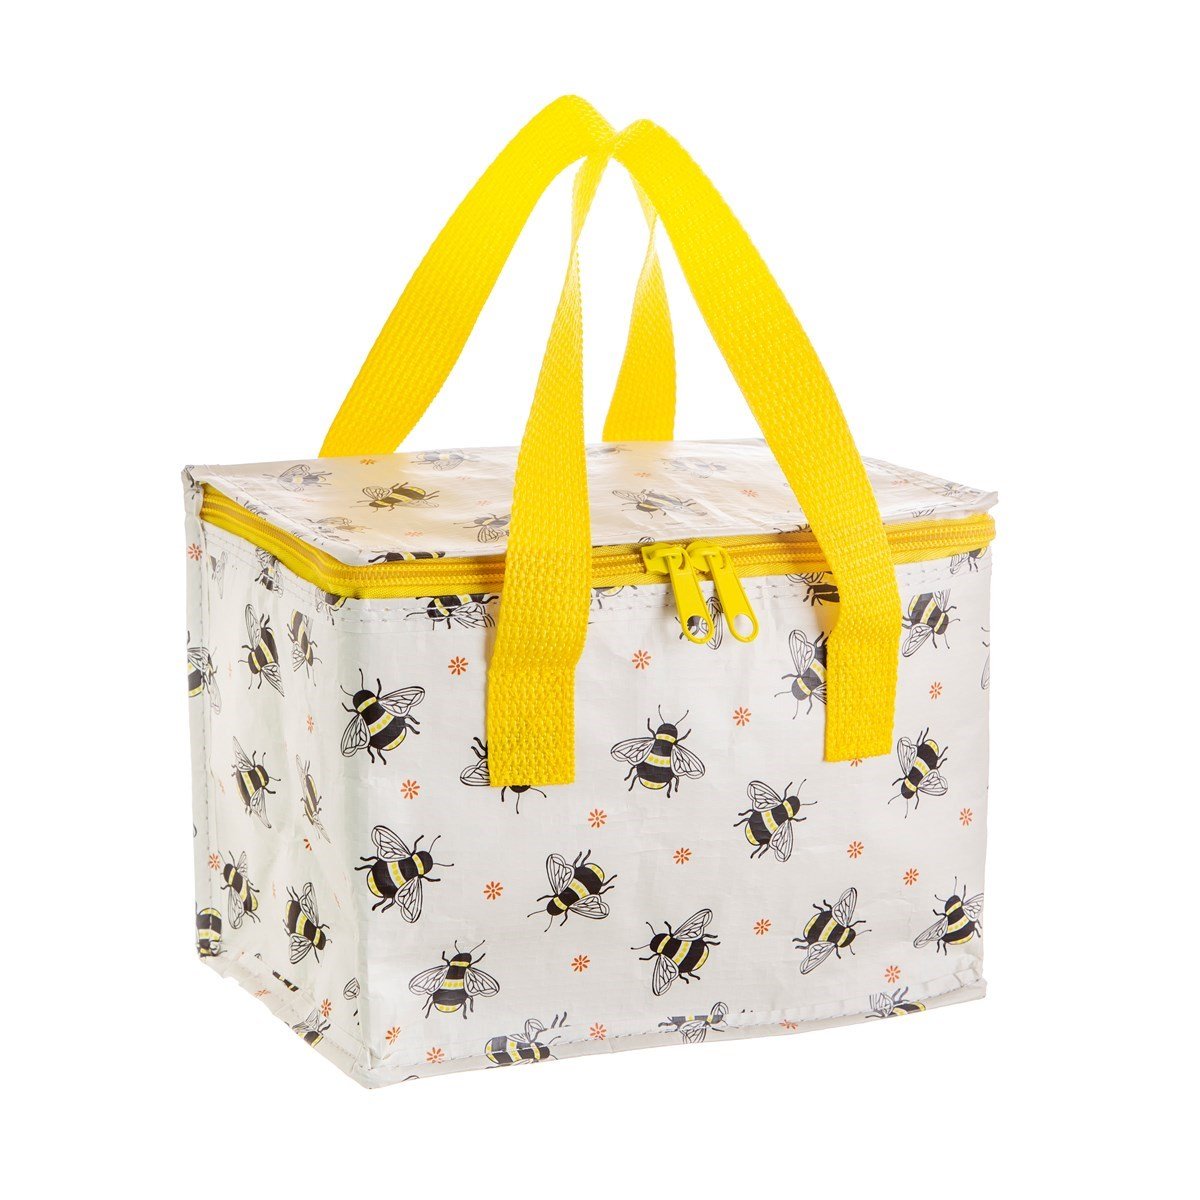 BUSY BEES LUNCH BAG LUNCH BAGS & BOXES from Eleanoras